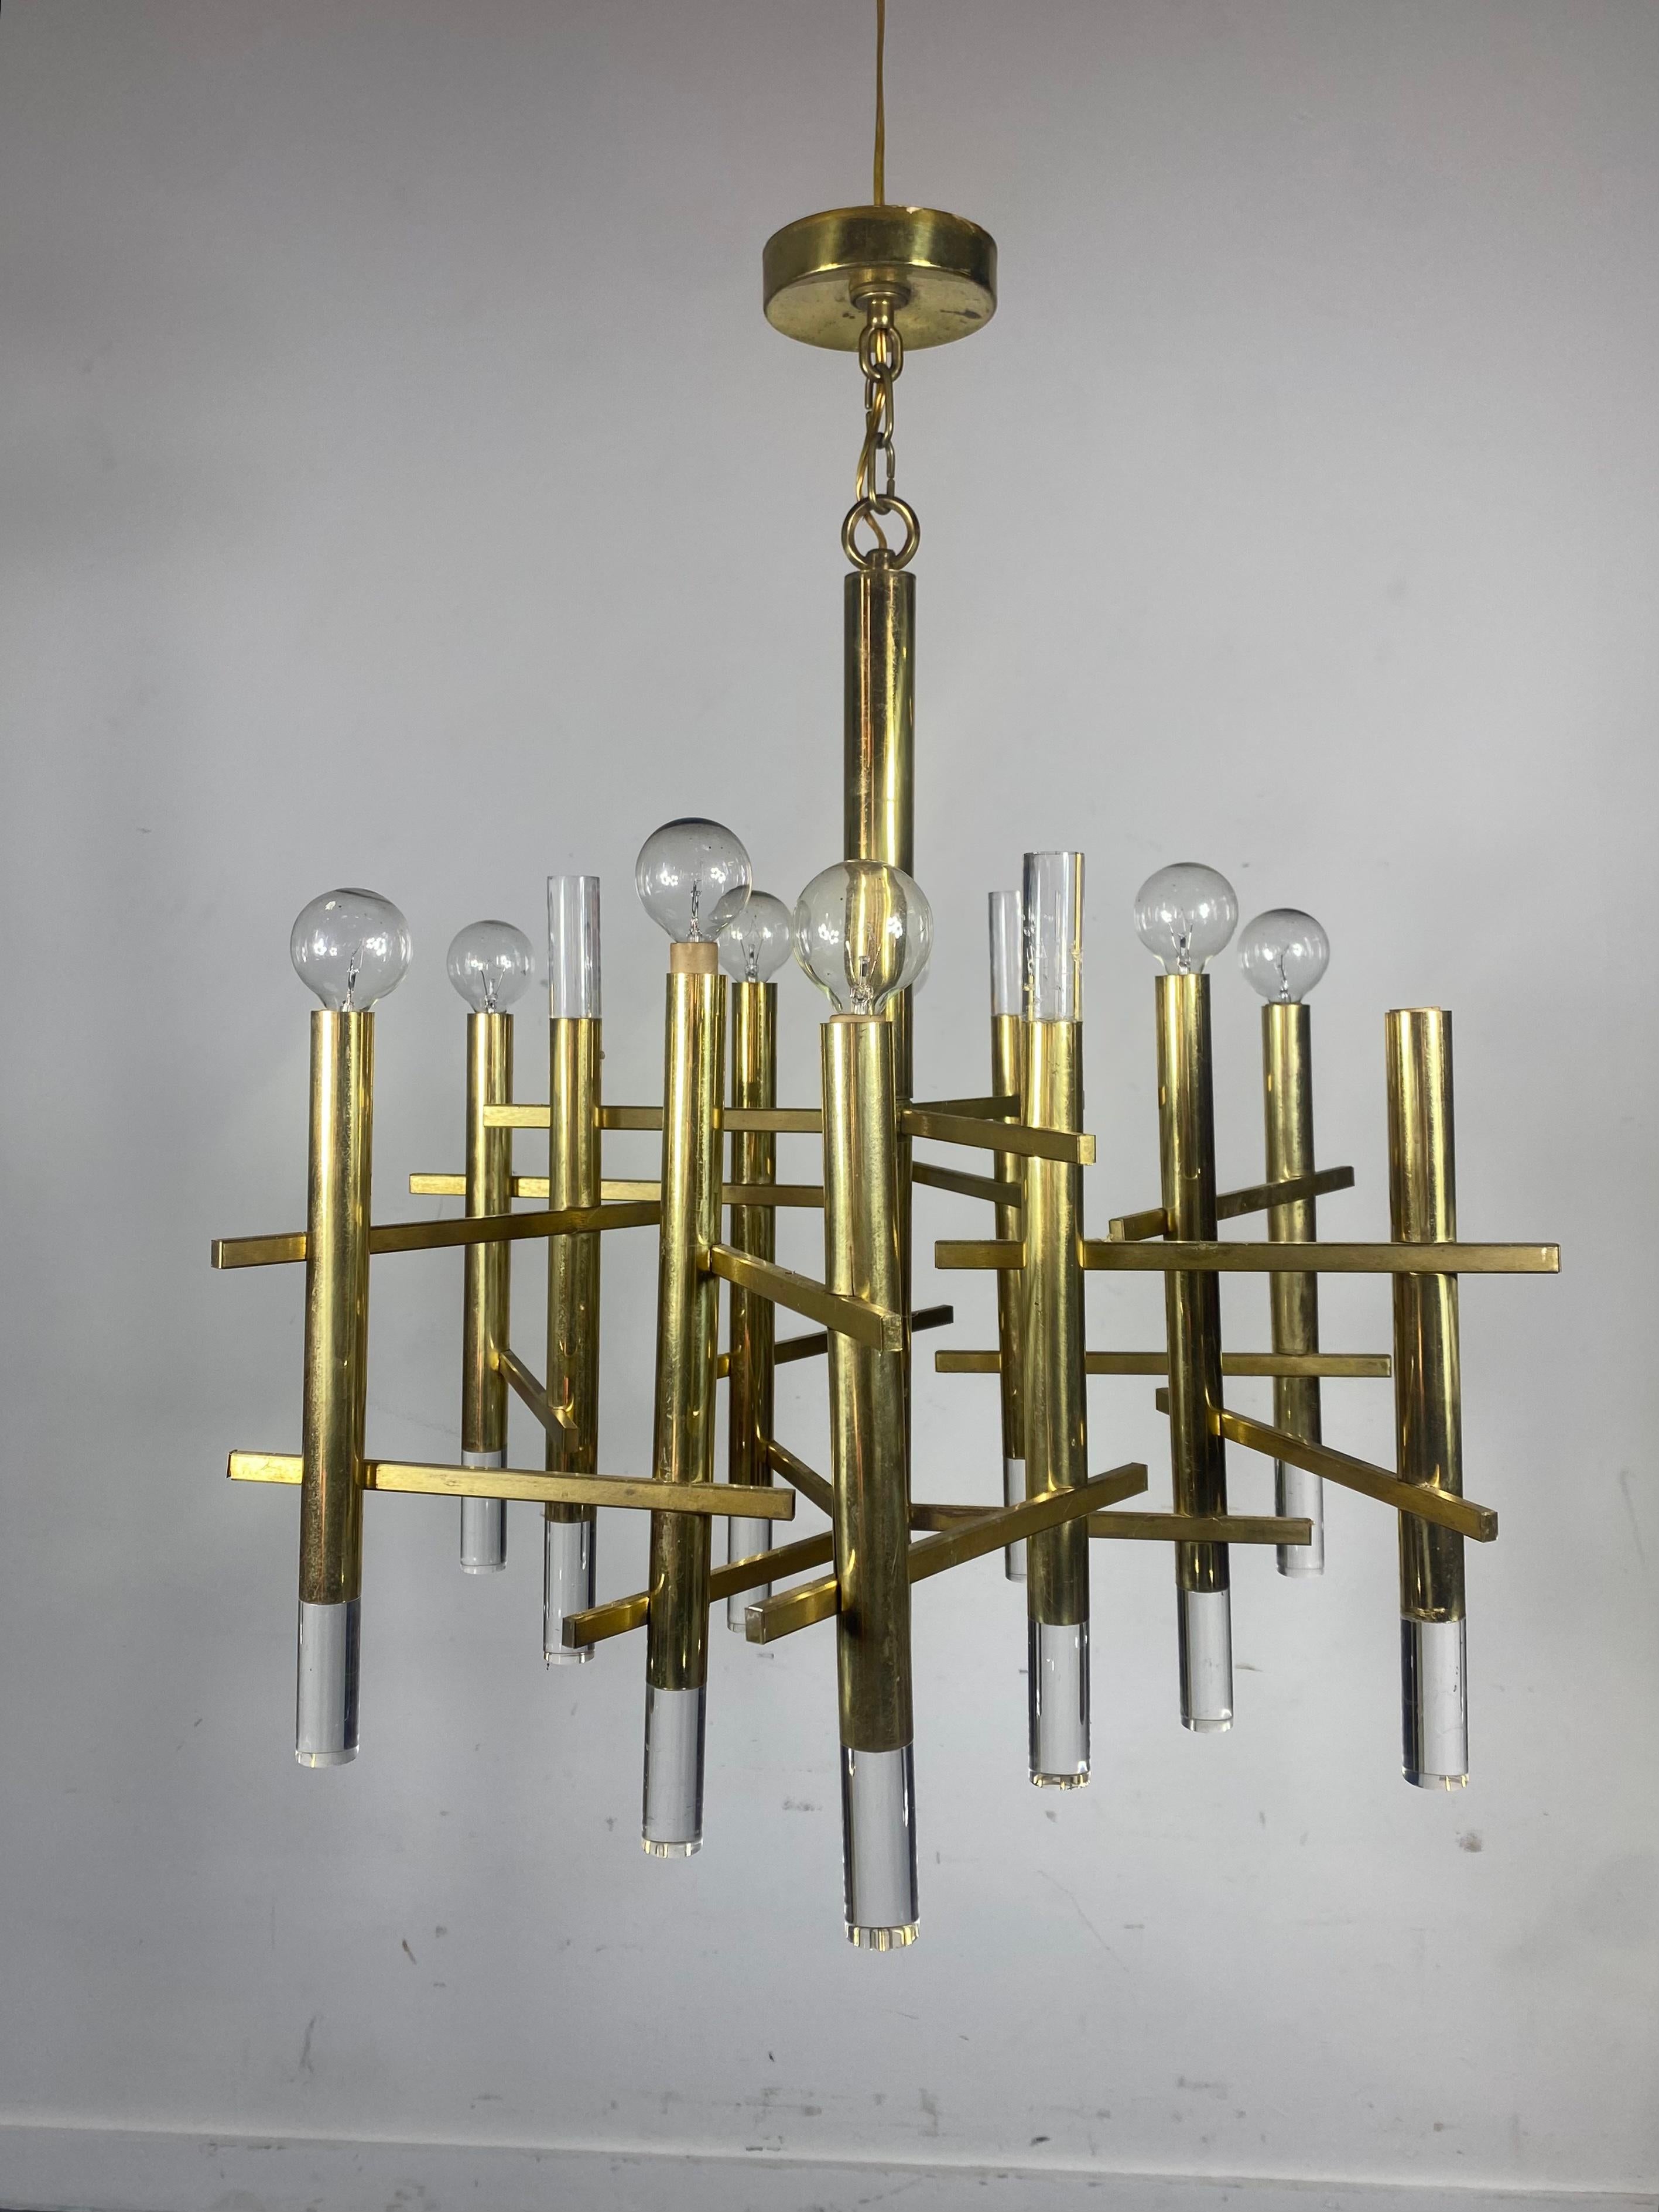 This refined rectilinear chandelier was realized by Gaetano Sciolari in Italy, circa 1970. It features a cylindrical body with six arms of the same form attached via rectangular slats to create a dynamic basket weave pattern in alternating segments